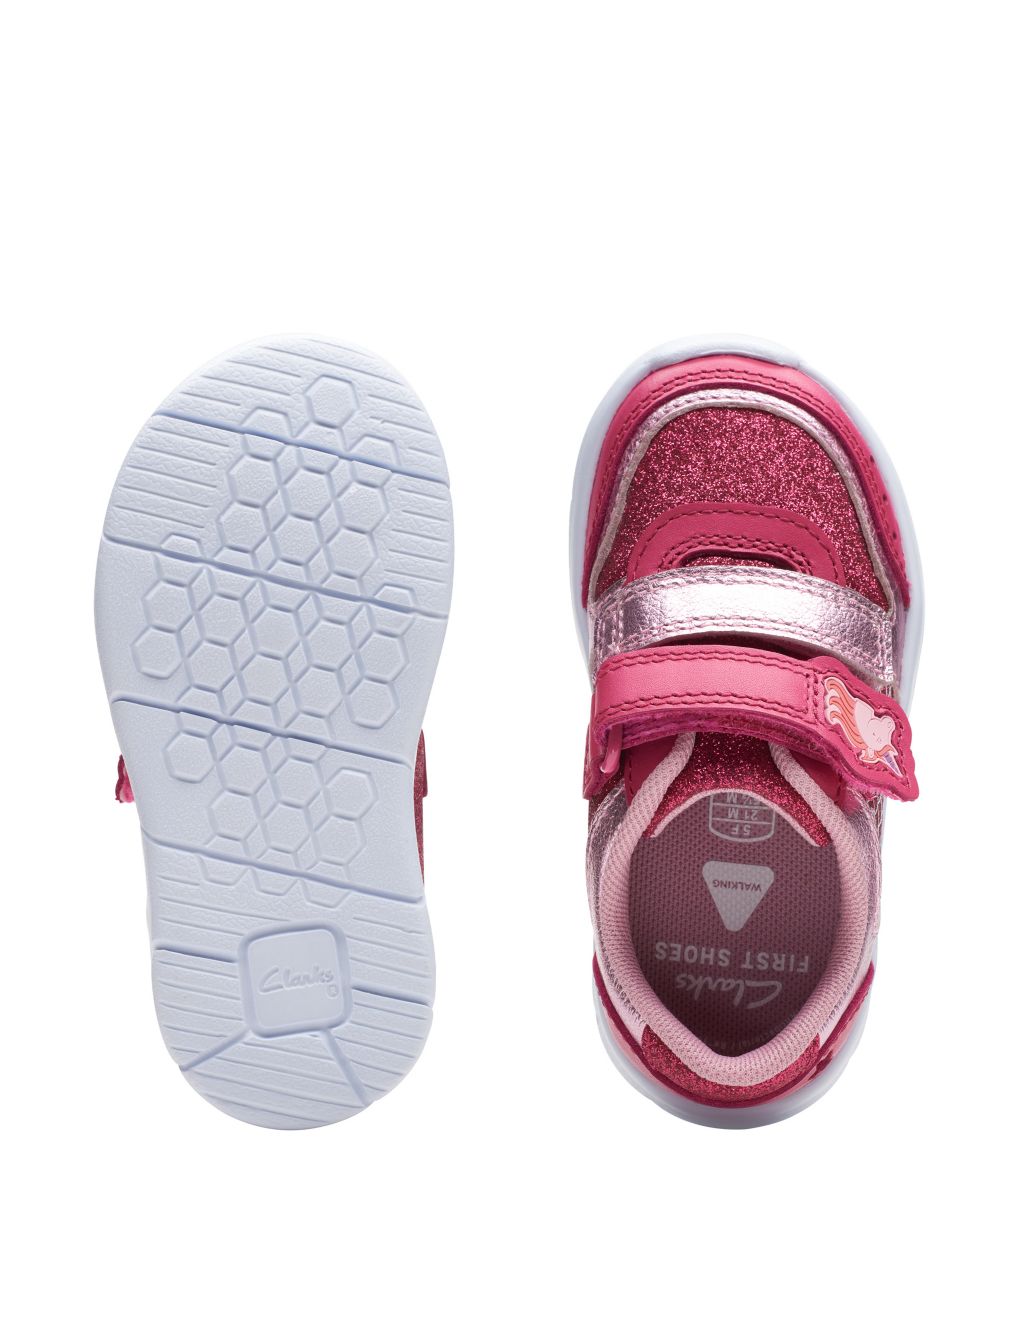 Kids' Leather Glitter Riptape Trainers (3 Small - 6½ Small) image 5